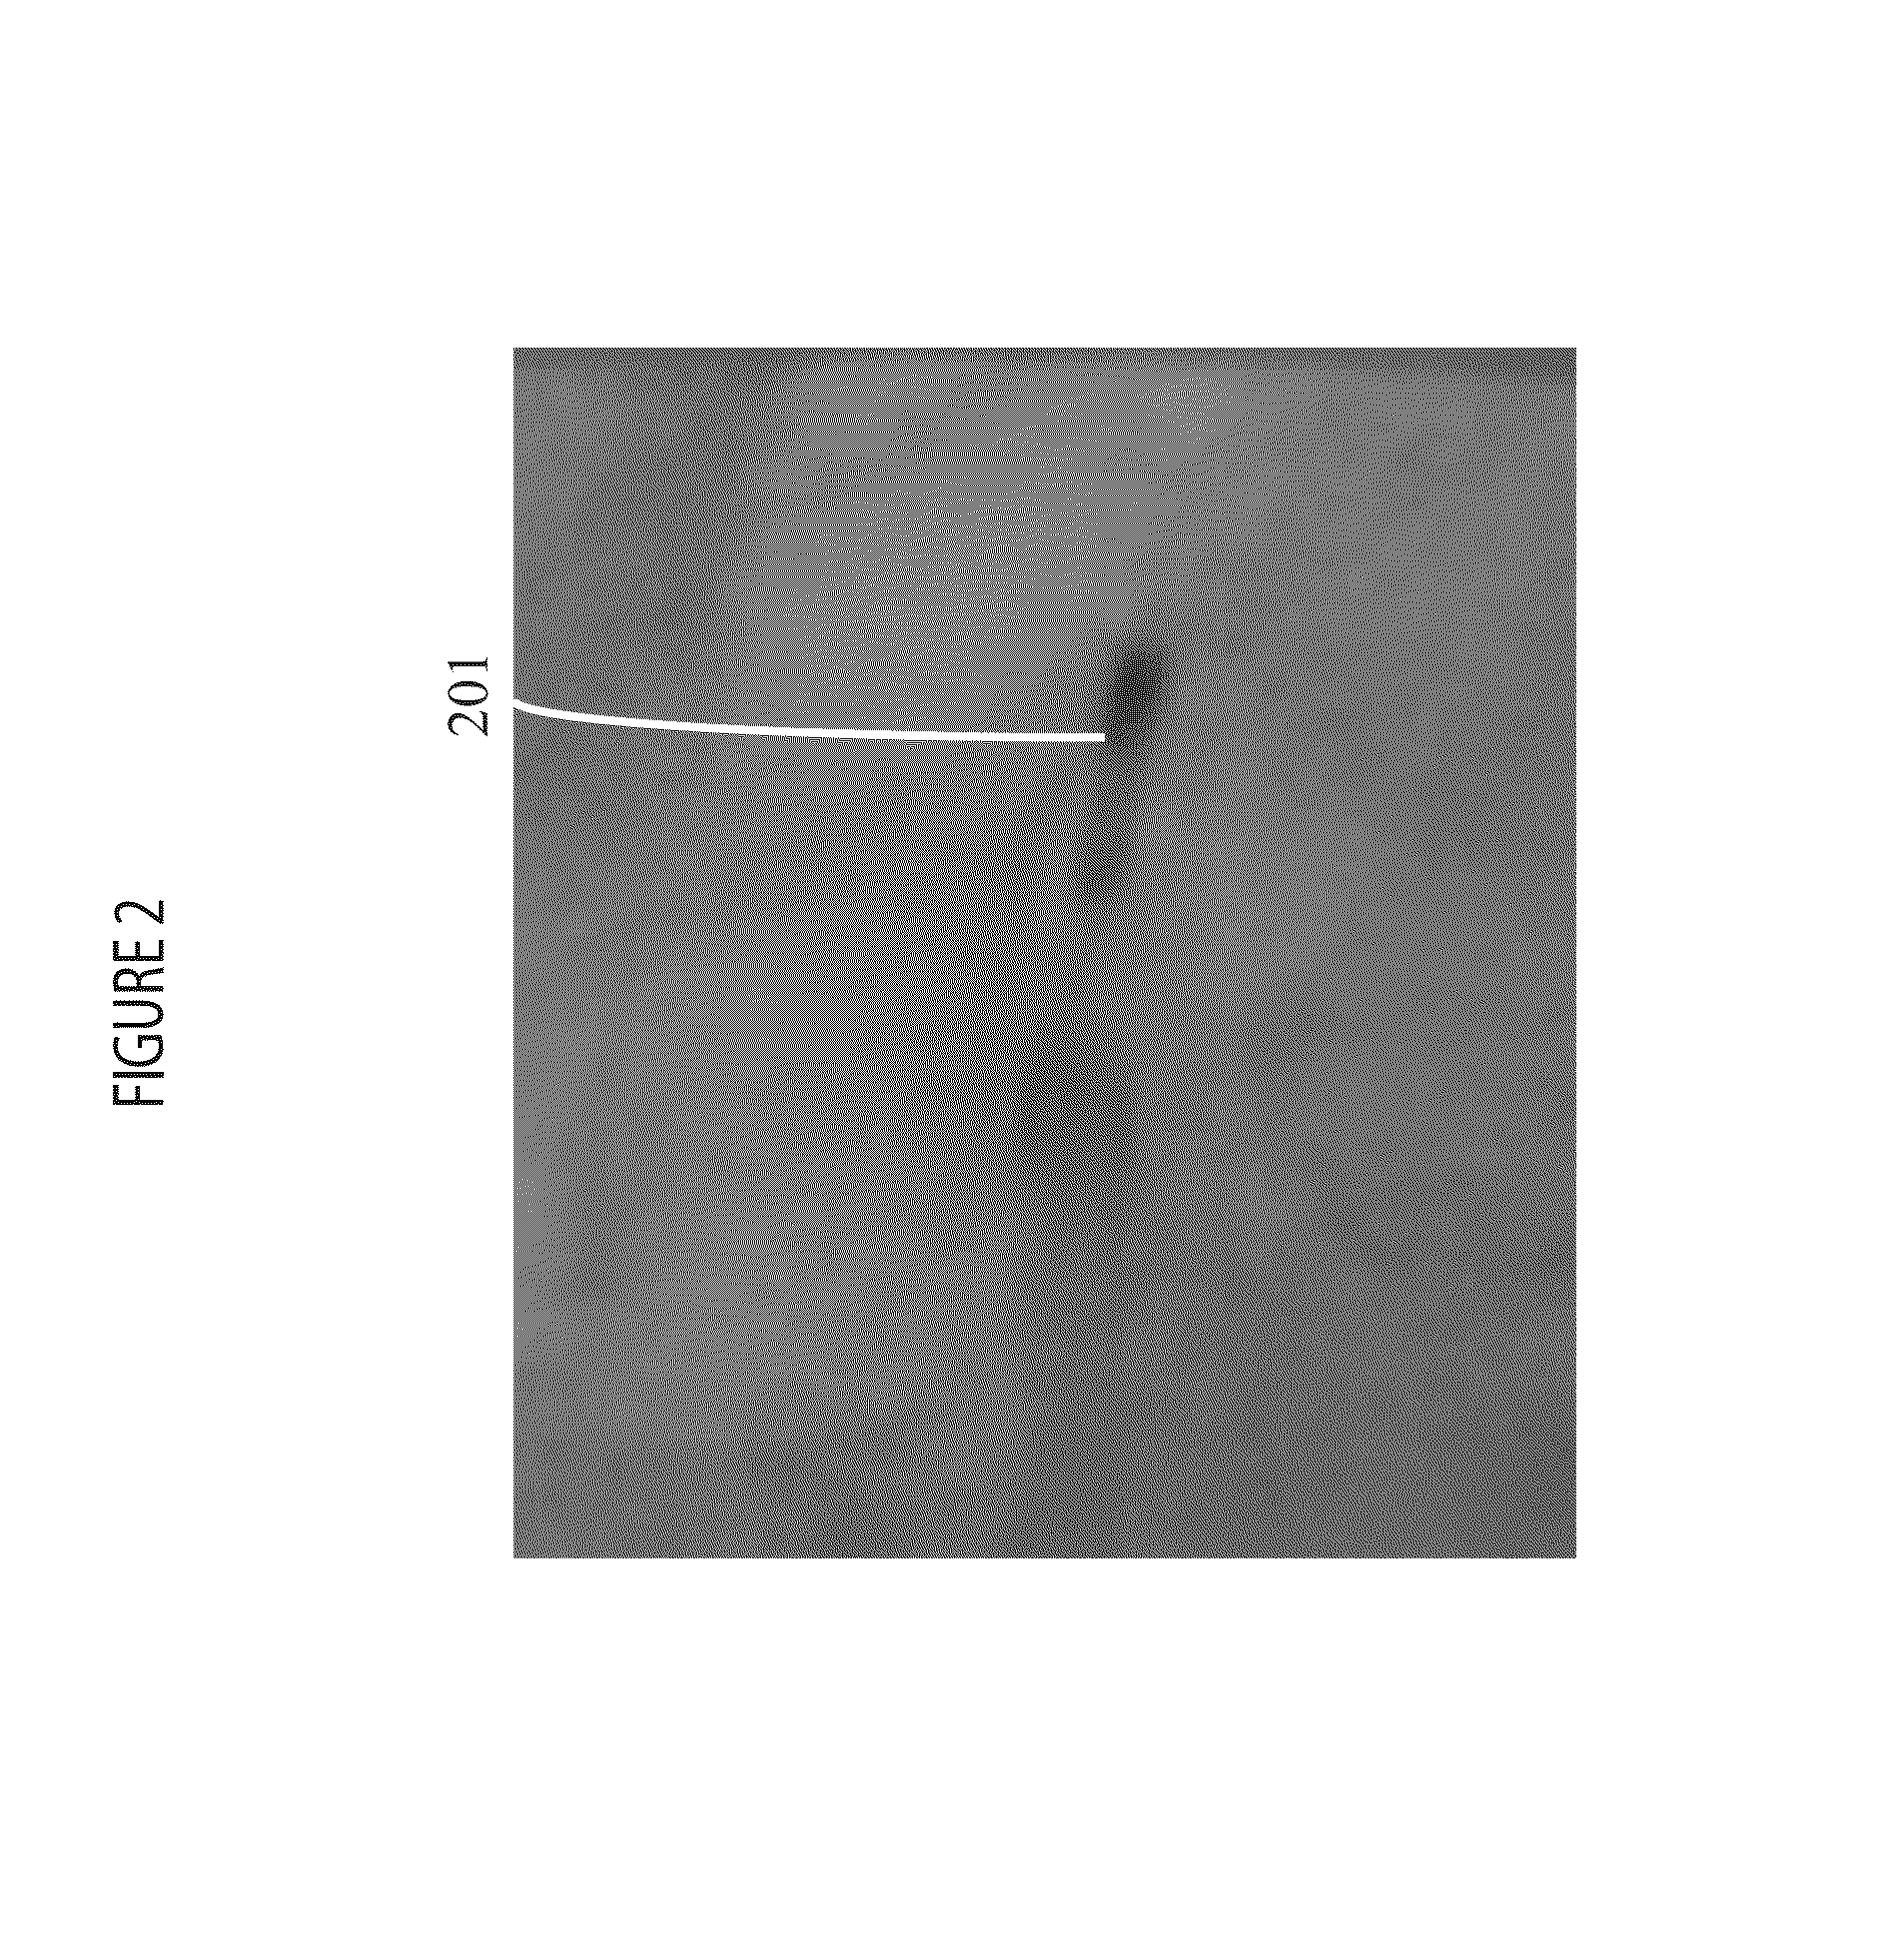 System for detecting rotation angle of a catheter in an X-ray image